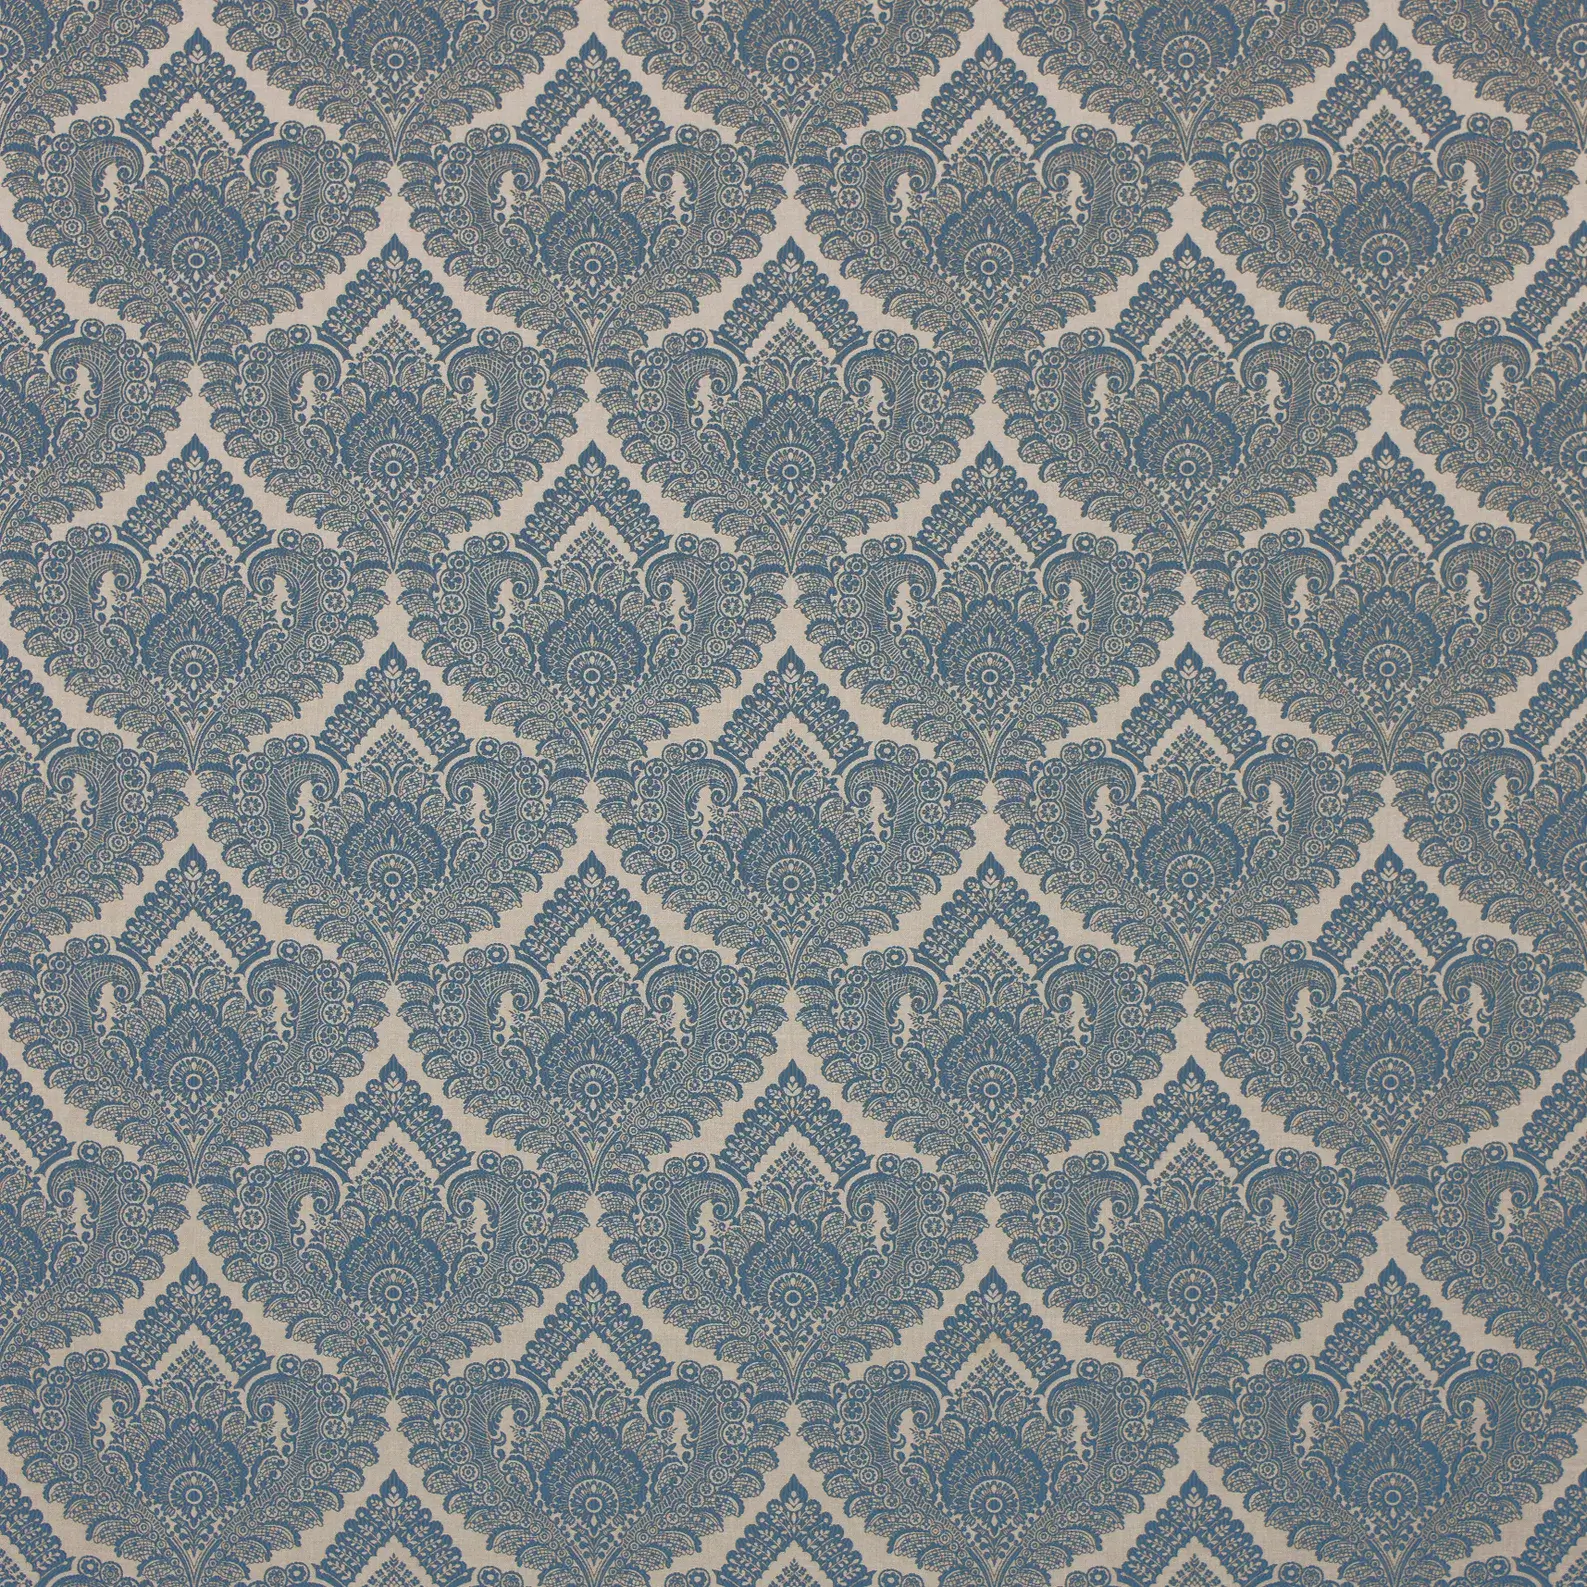 Luxembourg Upholstery Fabric by Warwick Fabric.